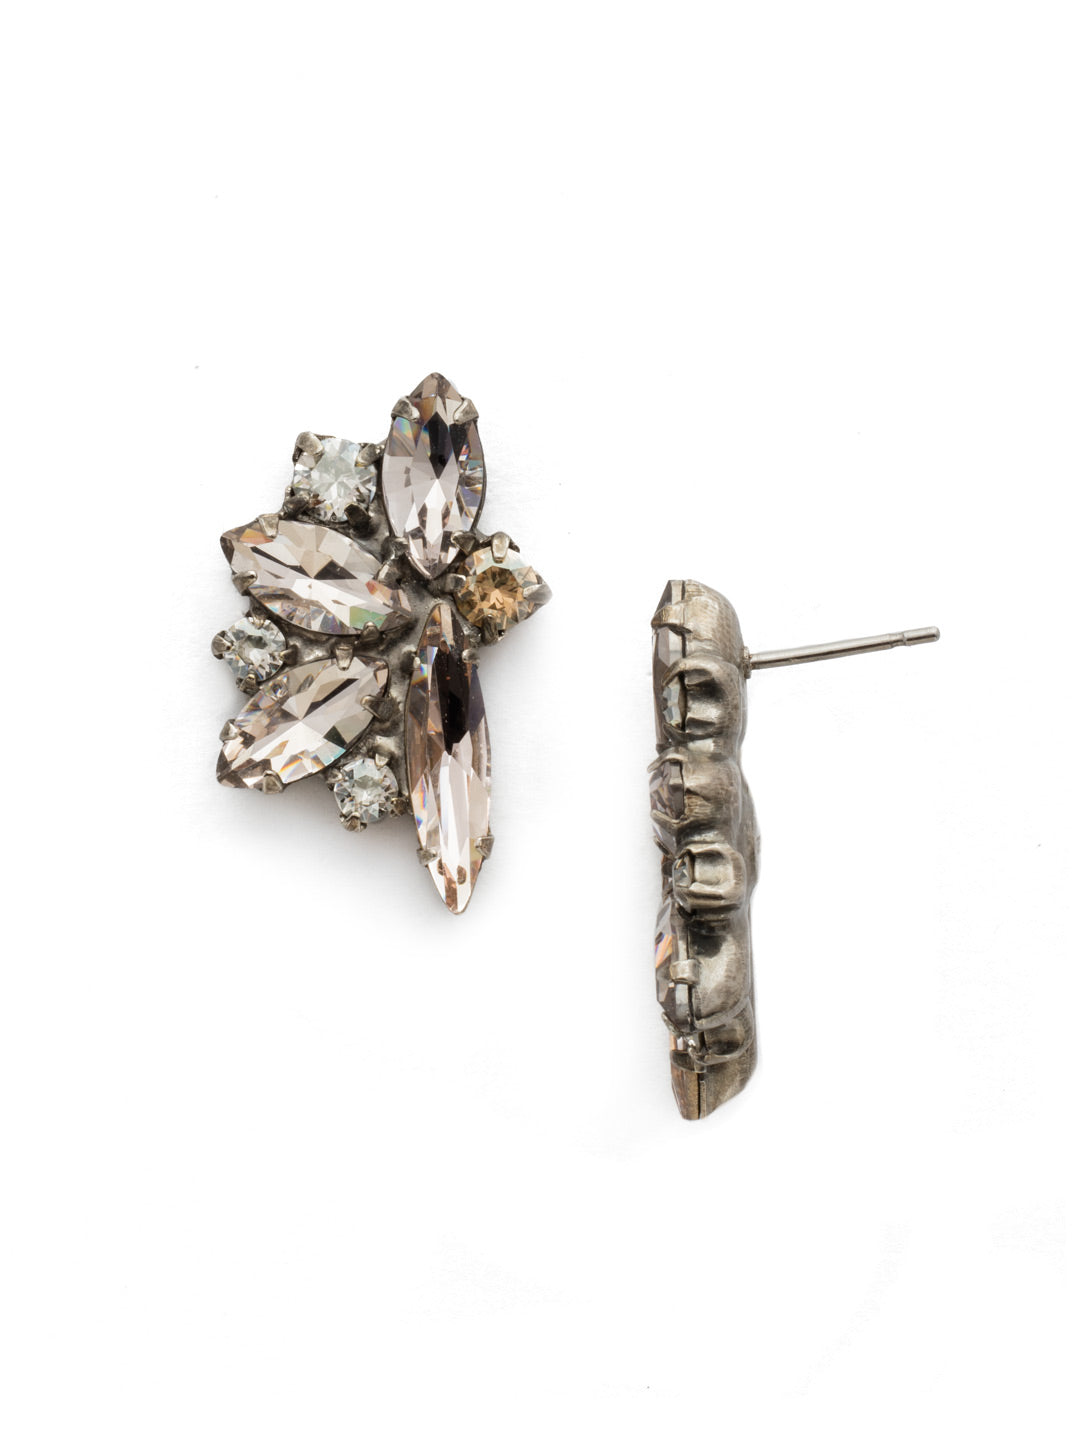 Fanned Vavette Stud Earrings - ECZ21ASSRO - Looking sharp! This post earring features a series of pointed navette crystals fanned out from a central round crystal.